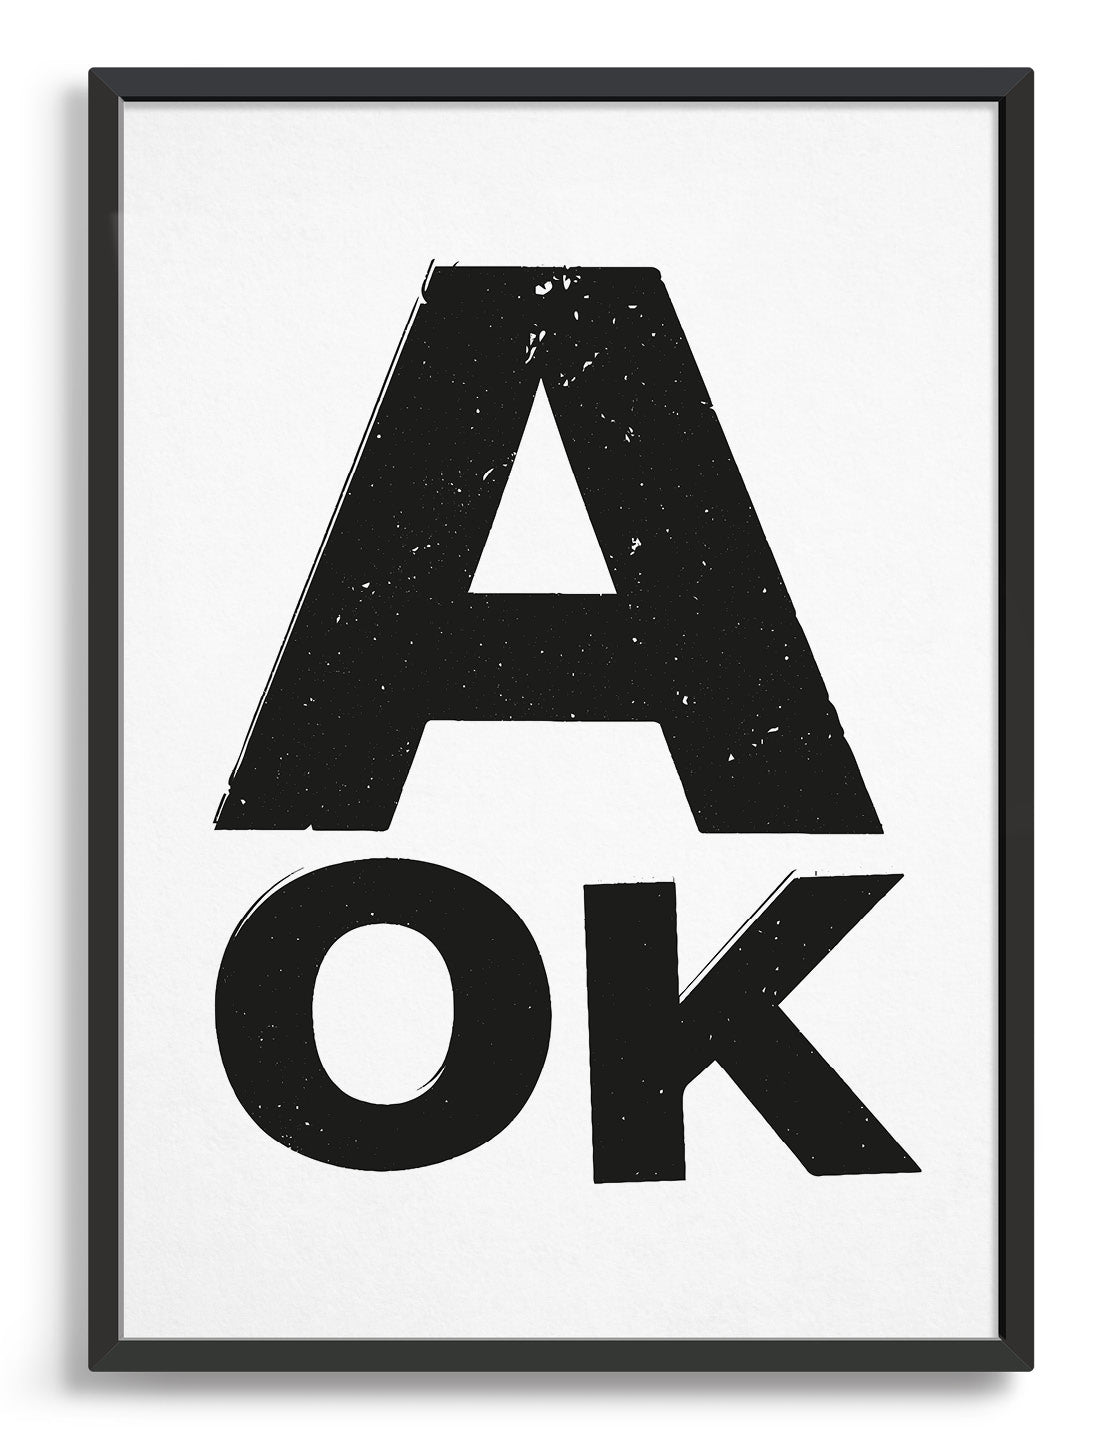 AOK typography poster with black lettering against a white background